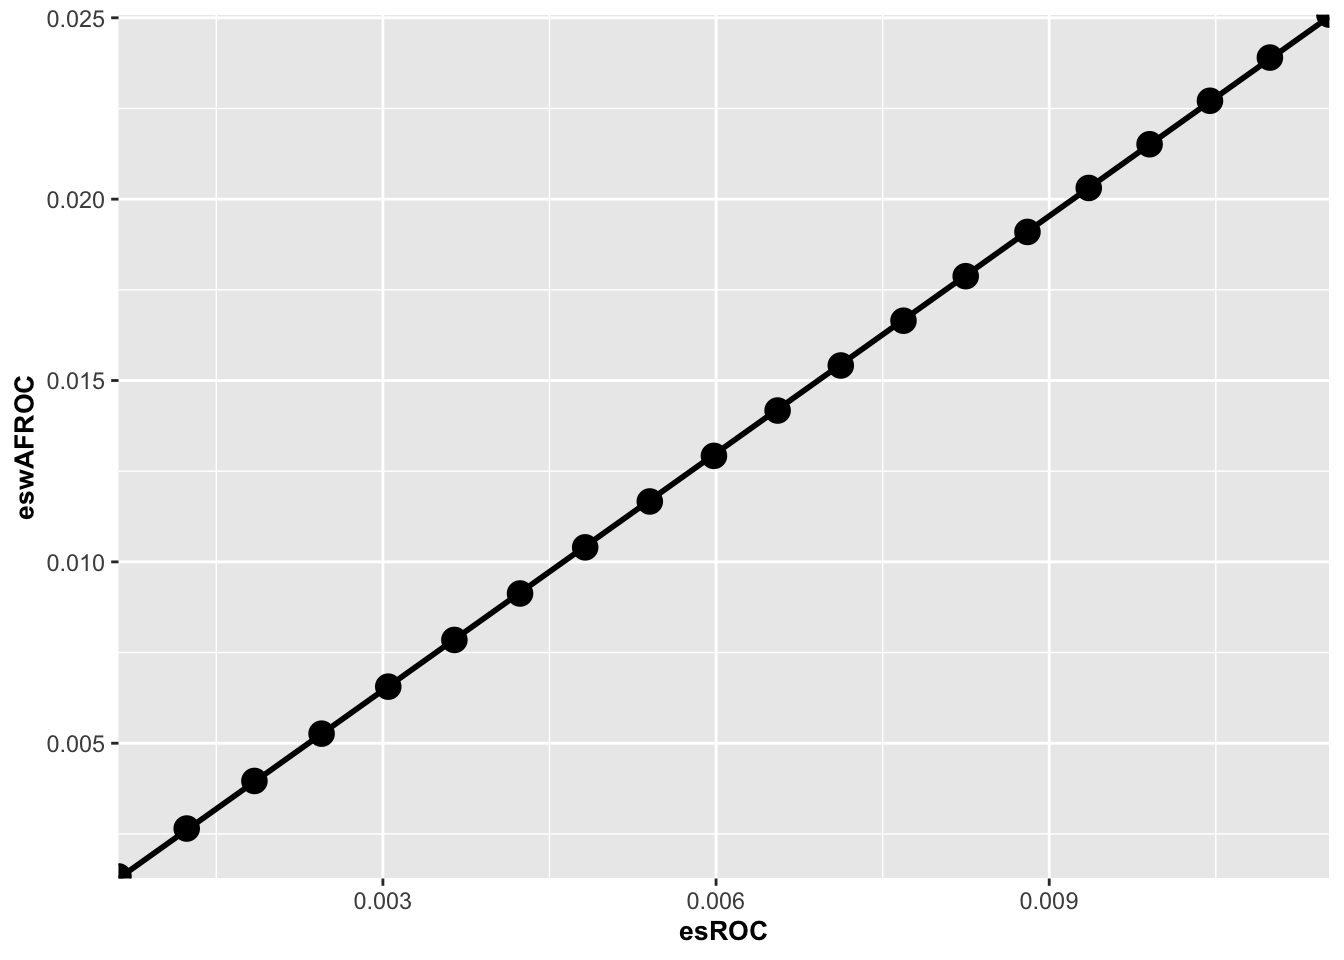 Plot of wAFROC effect size vs. ROC effect size. The straight line fit through the origin has slope 2.169.